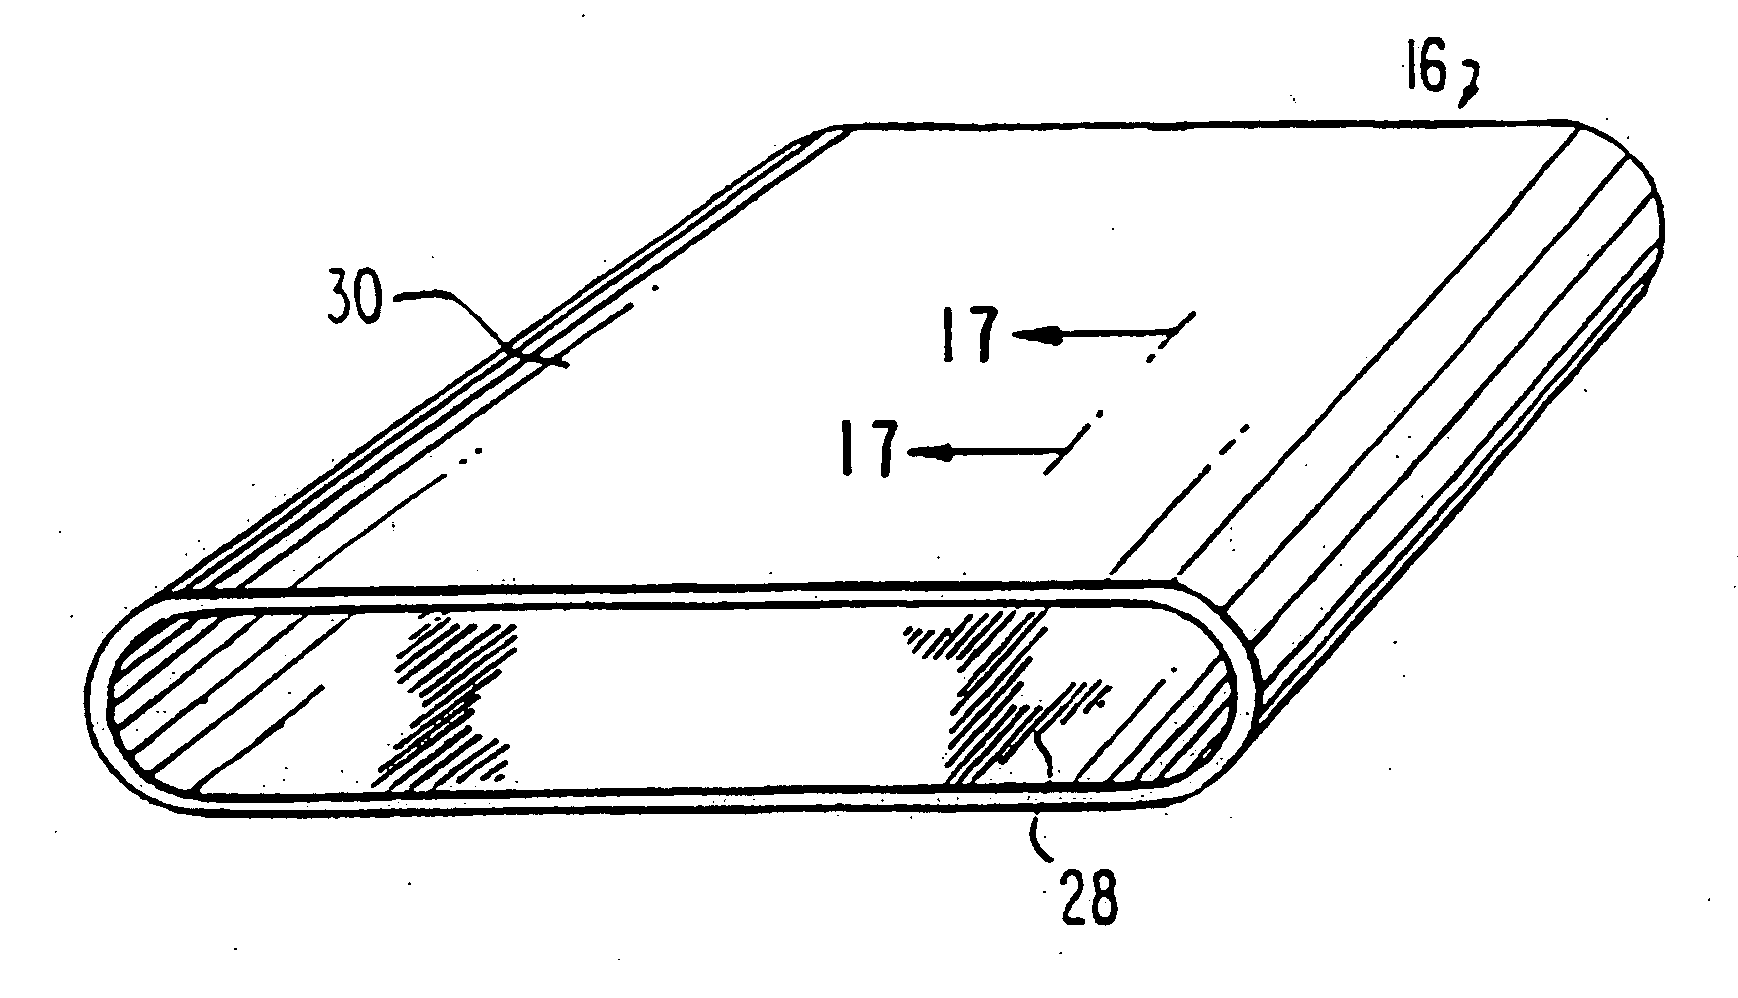 Belts and roll coverings having a nanocomposite coating